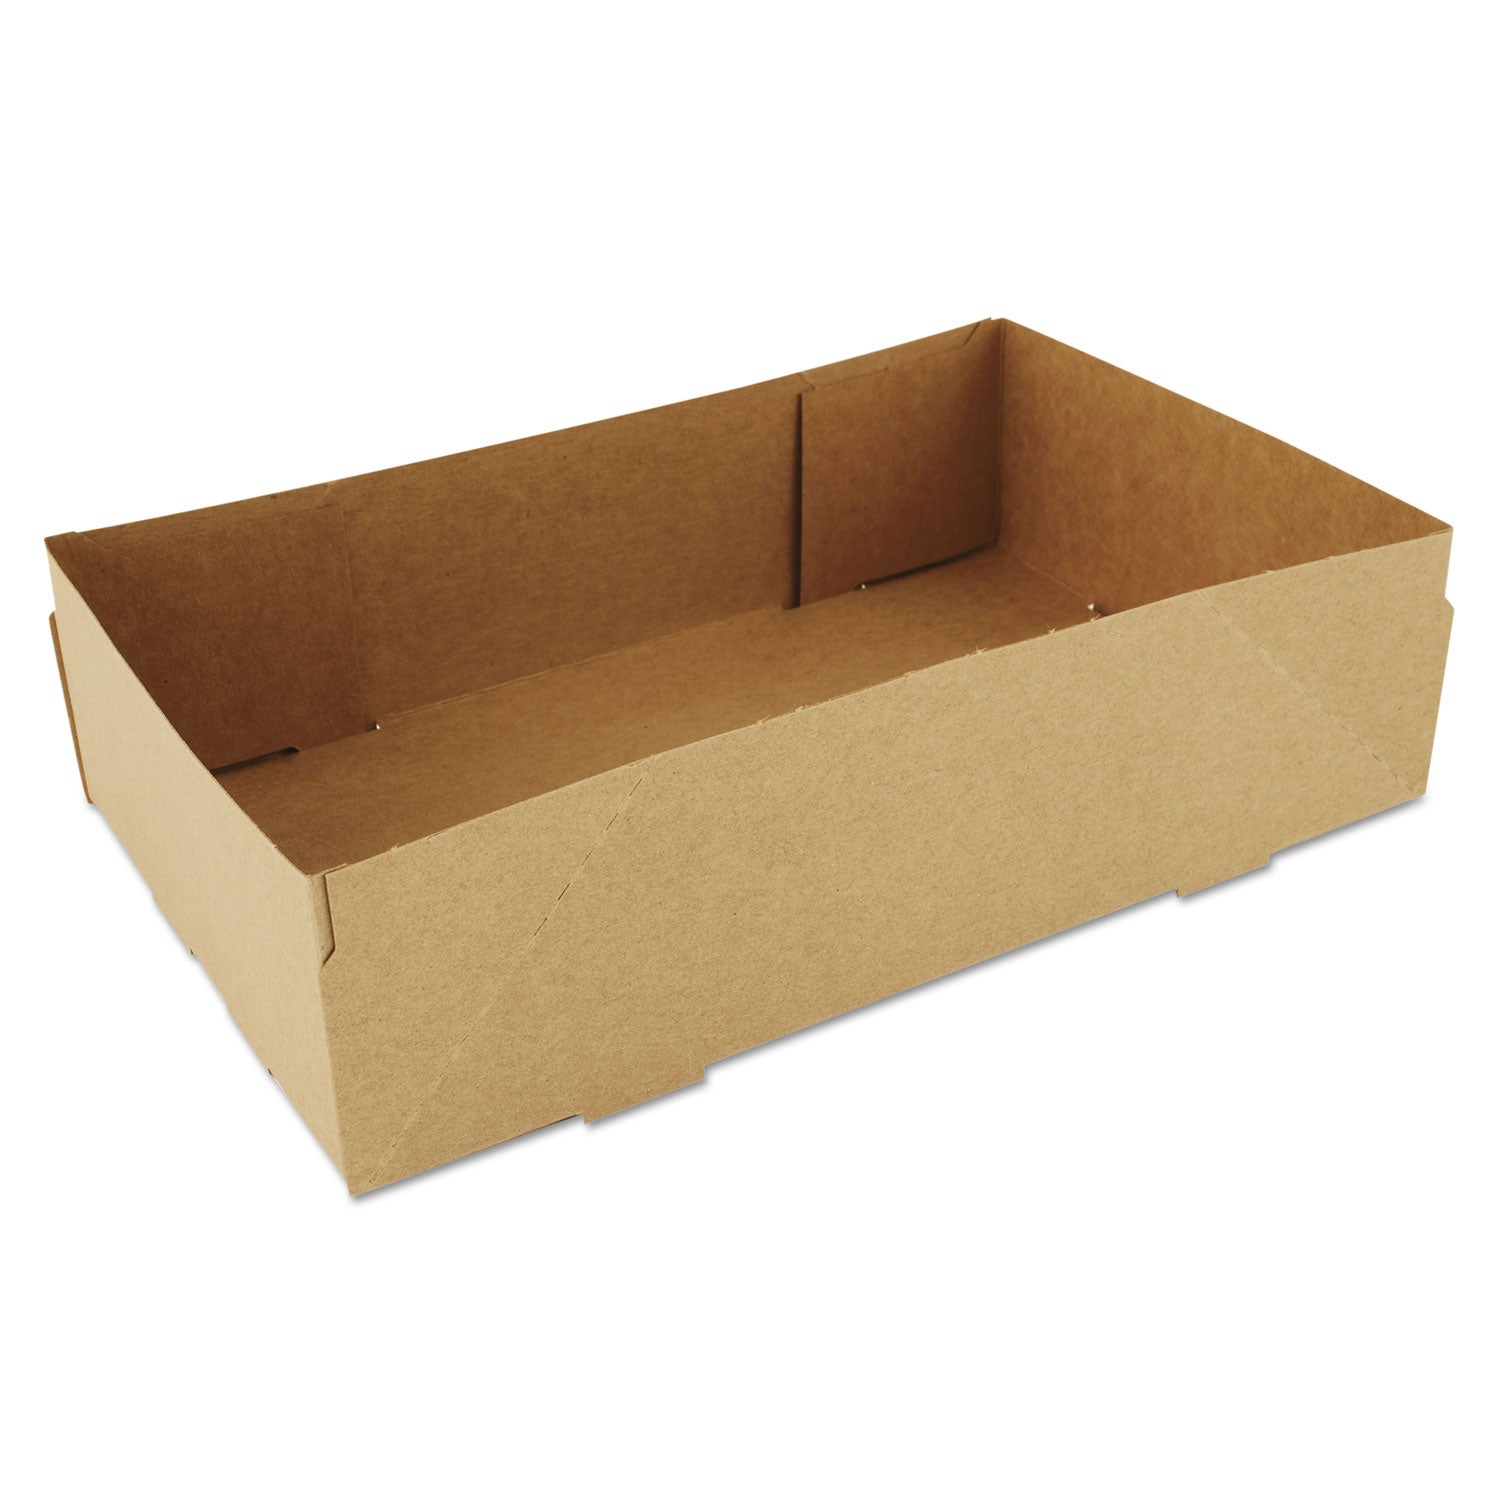 4-Corner Pop-Up Food and Drink Tray, 8.63 x 5.5 x 2.25, Brown, Paper, 500/Carton - 